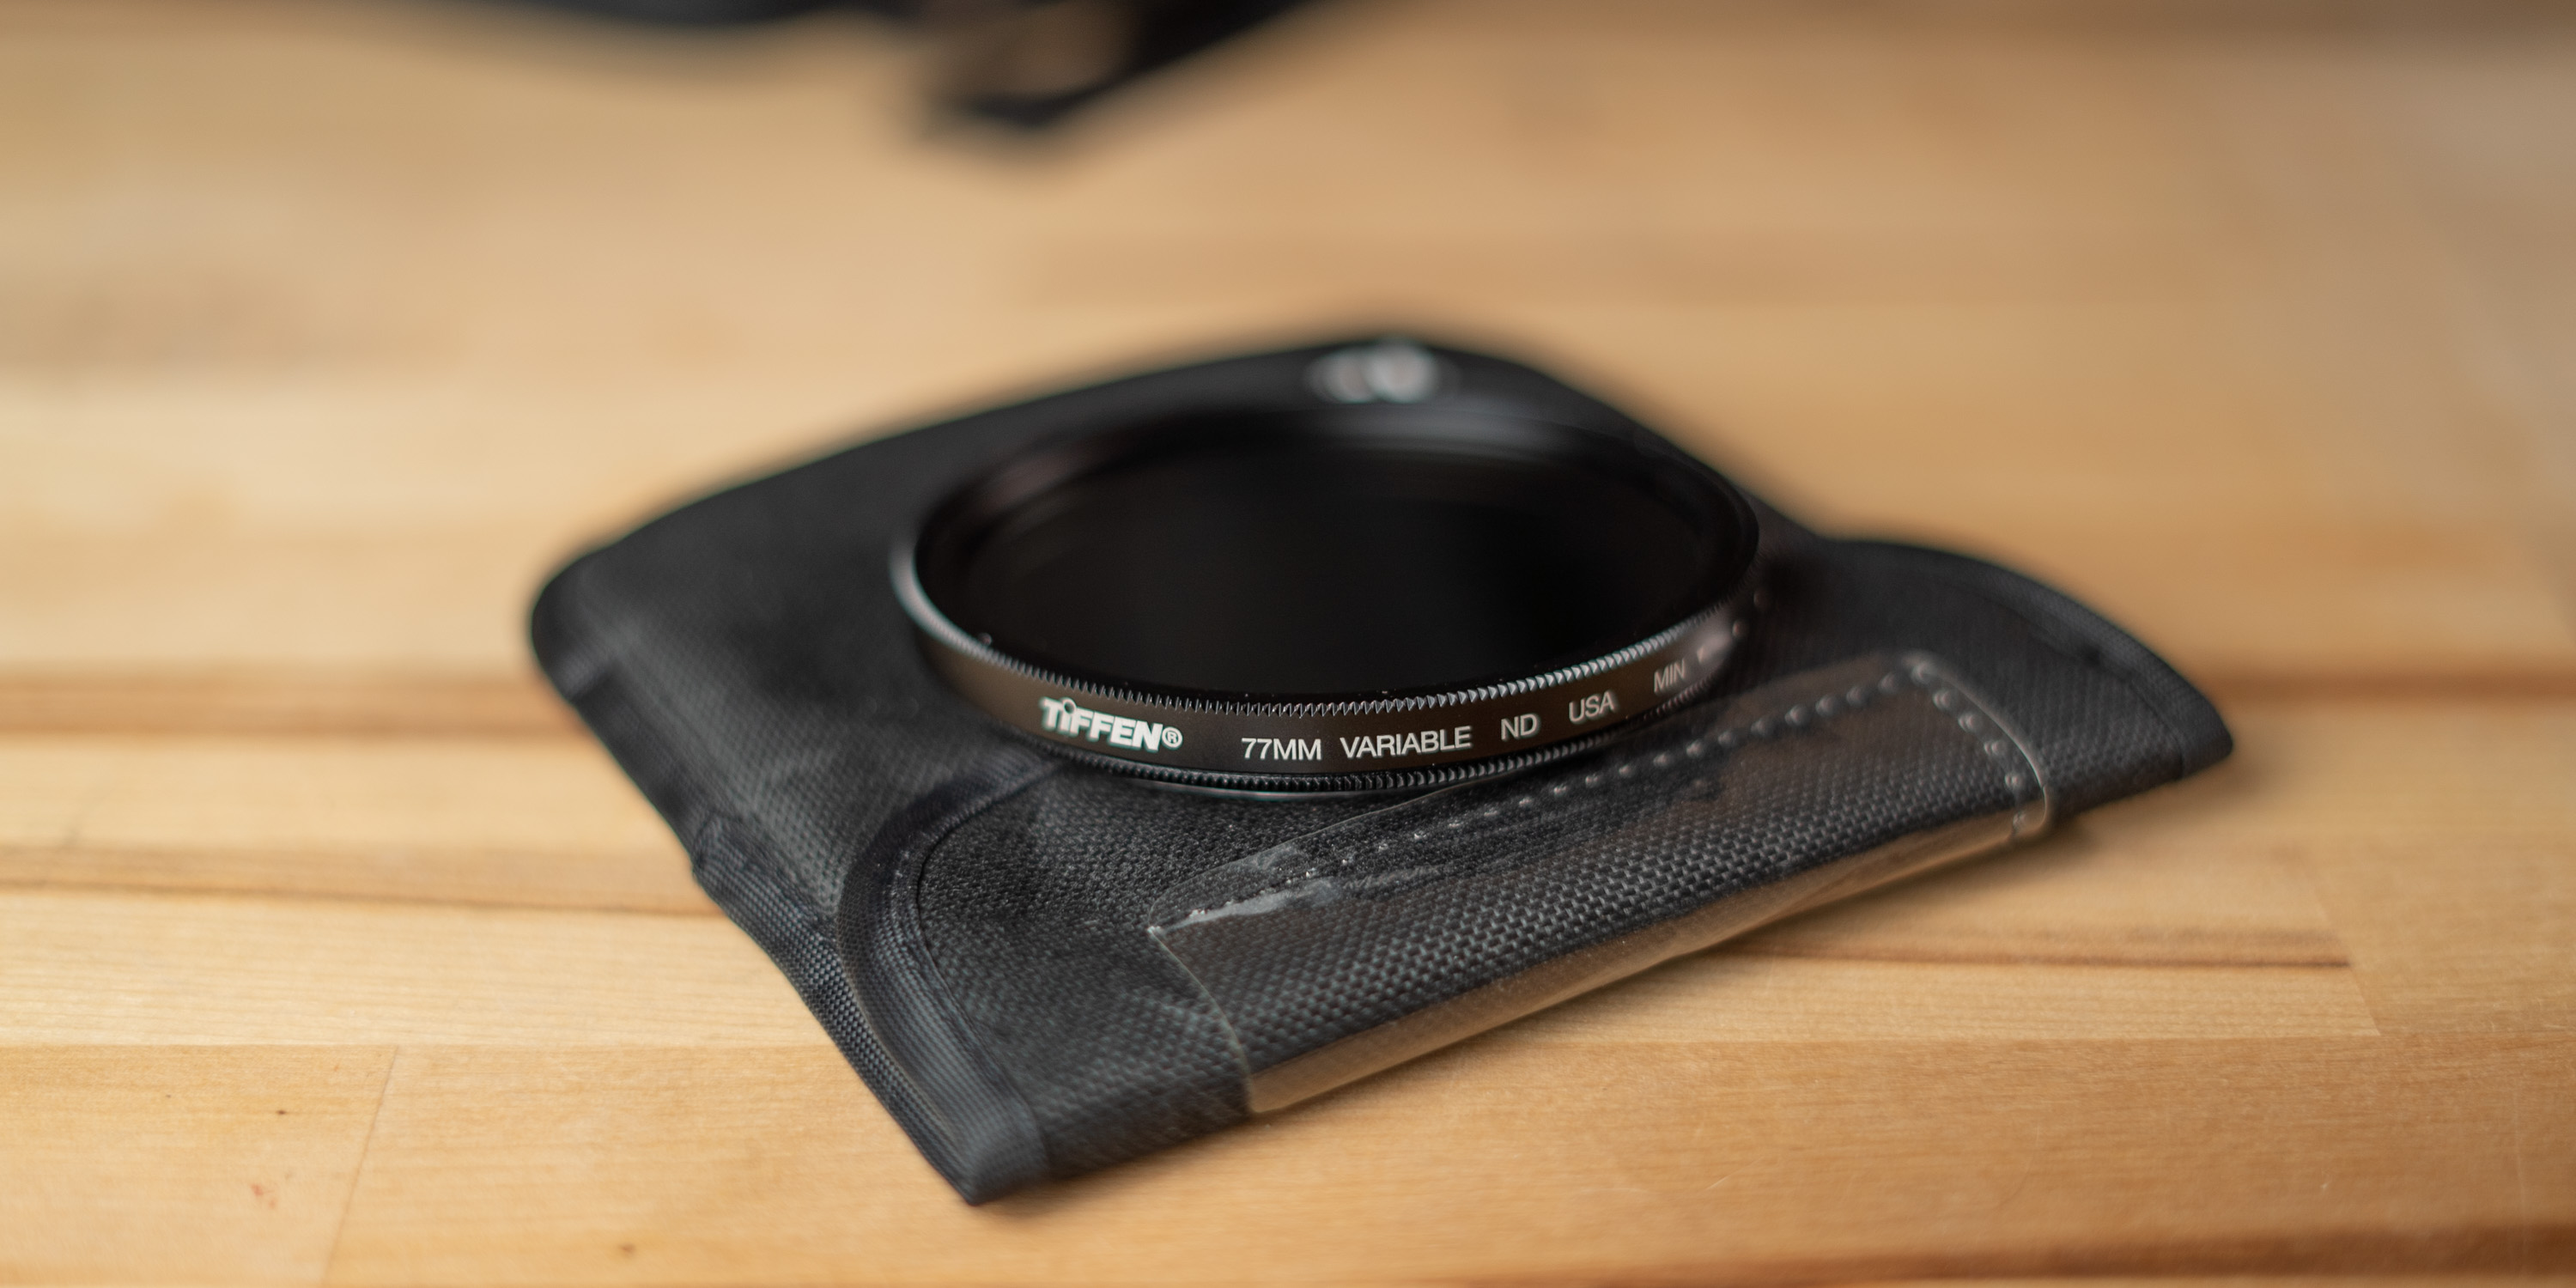 Tiffen 77mm Variable ND Filter